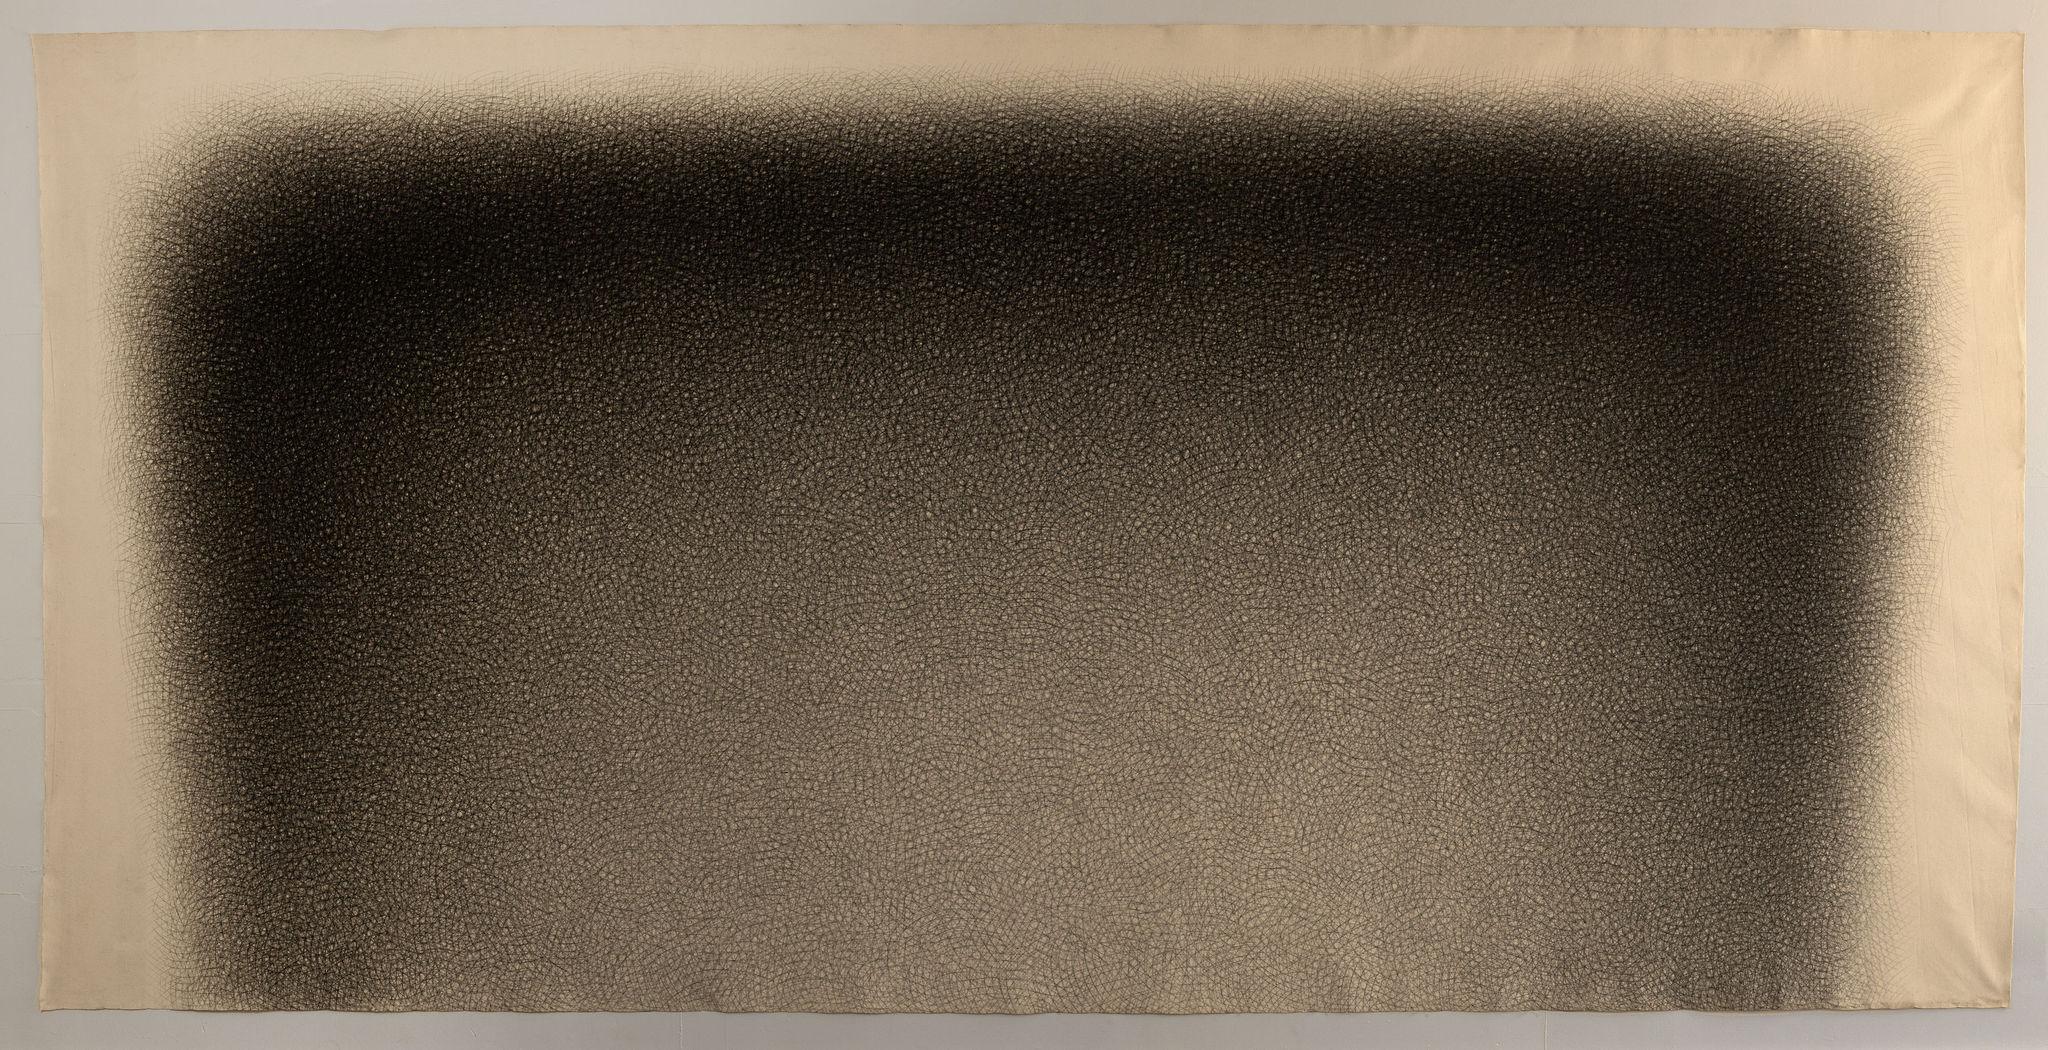 Jack Scott Abstract Drawing - "Light Black Blur #2" Charcoal Cross-Hatch Drawing Canvas 1978 Monumental Piece